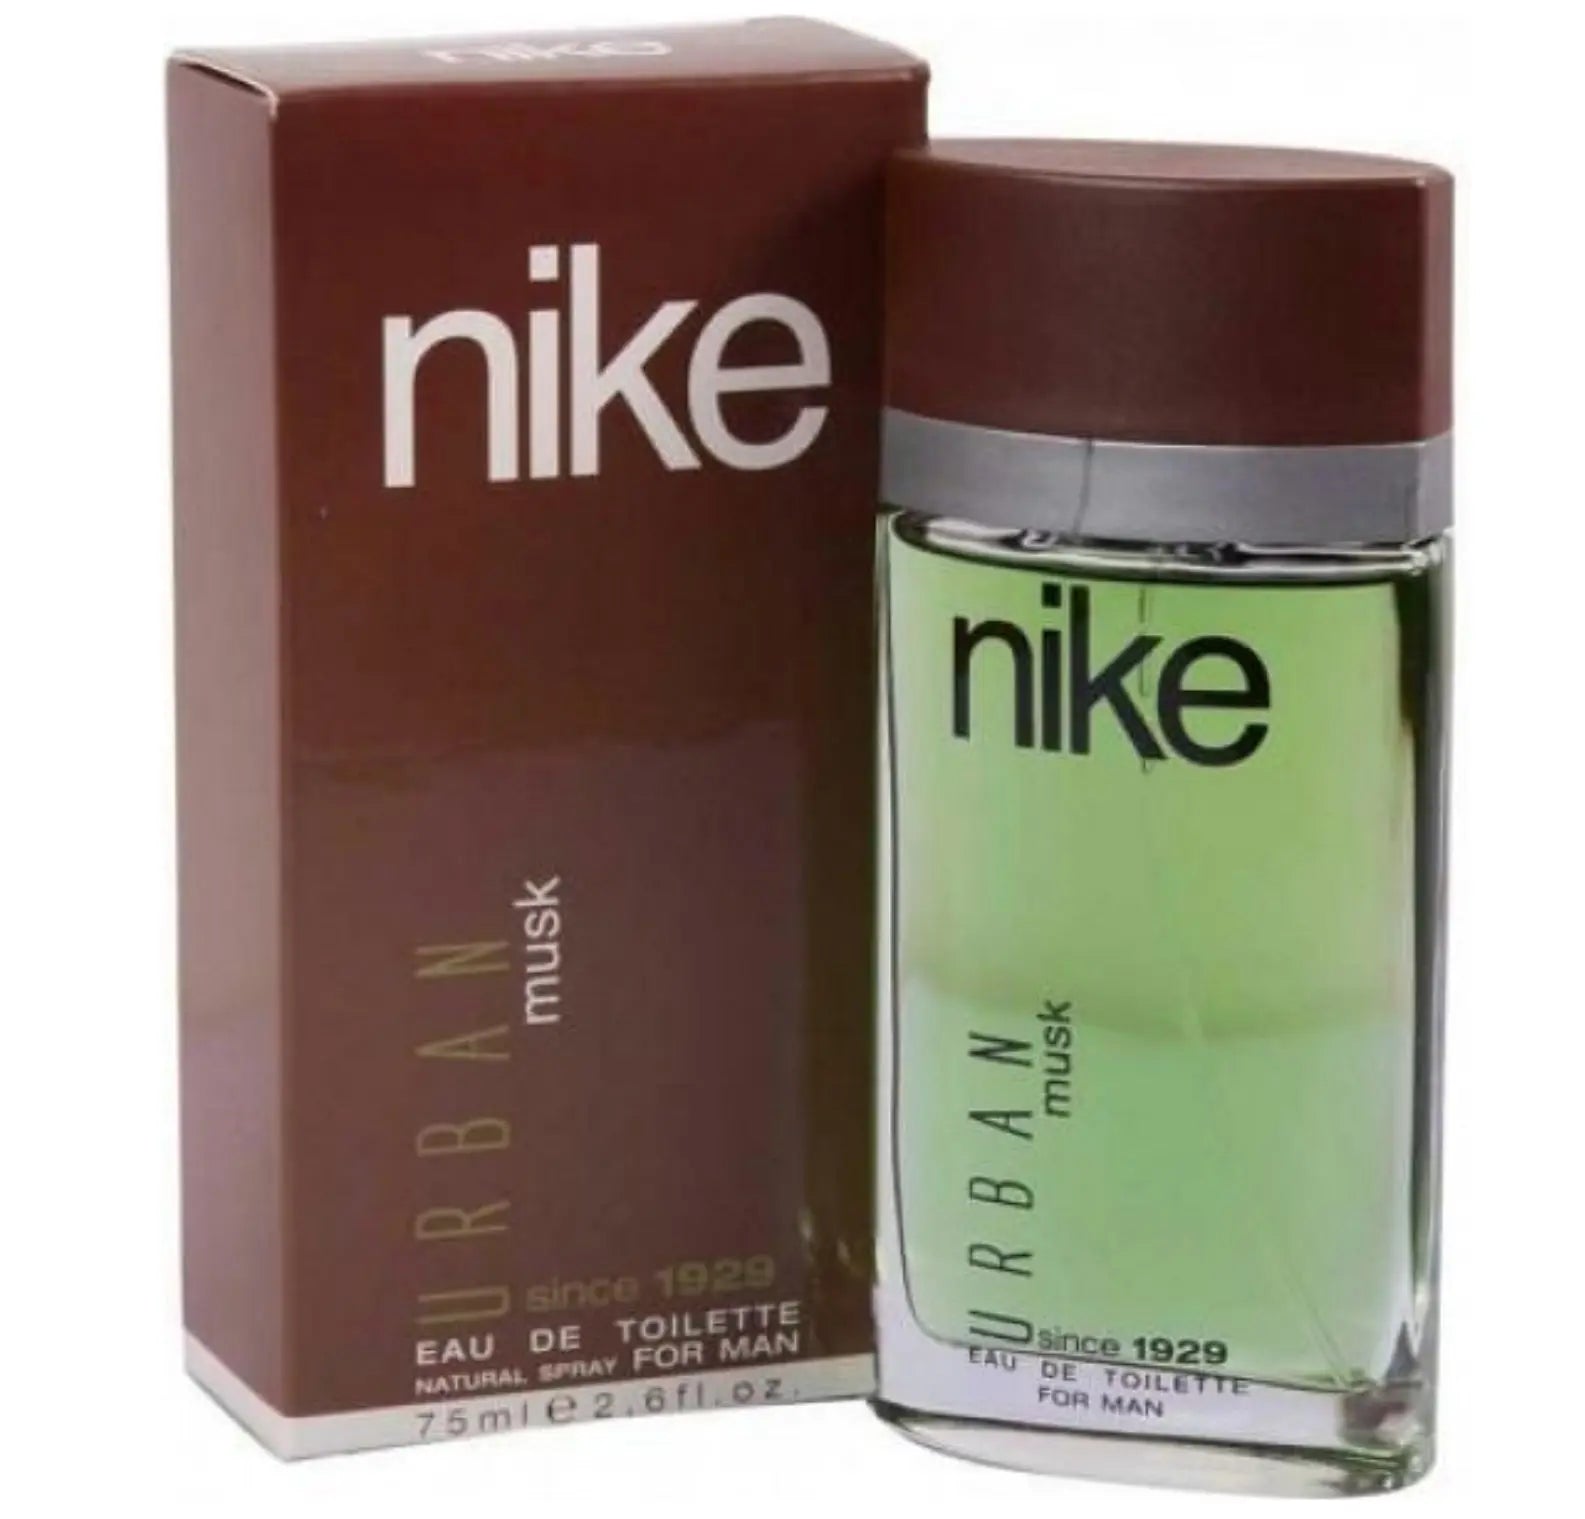 Nike Man Urban Musk Cologne EDT 75ml Imported Perfumes & Beauty Store